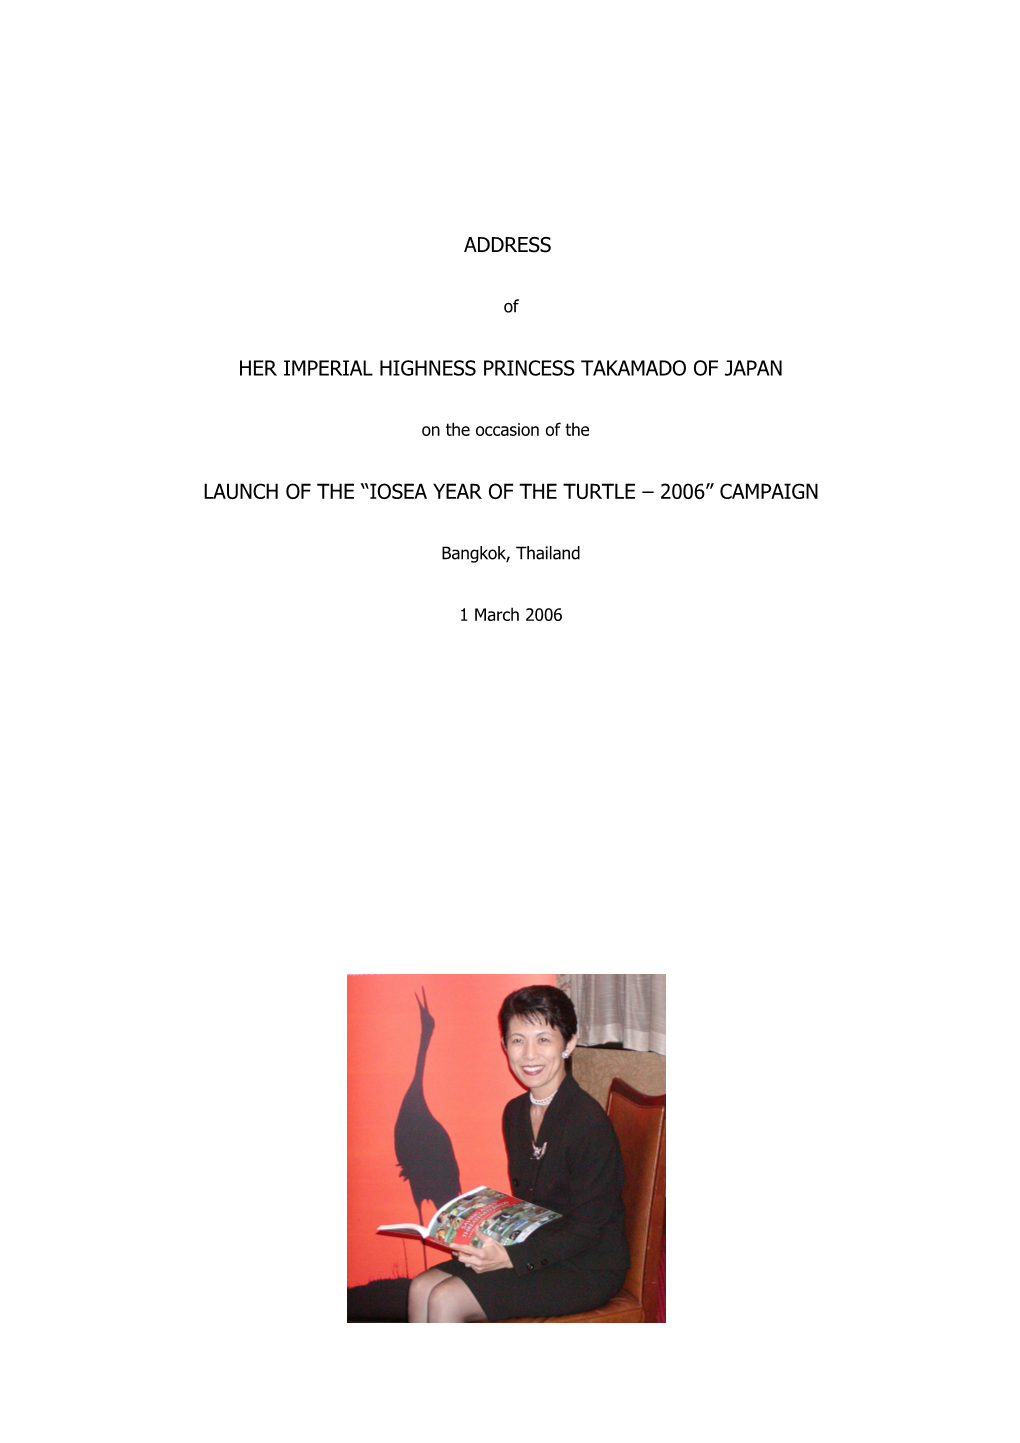 DRAFT Statement of Her Imperial Highness Princess Takamado of Japan (18/02/06)